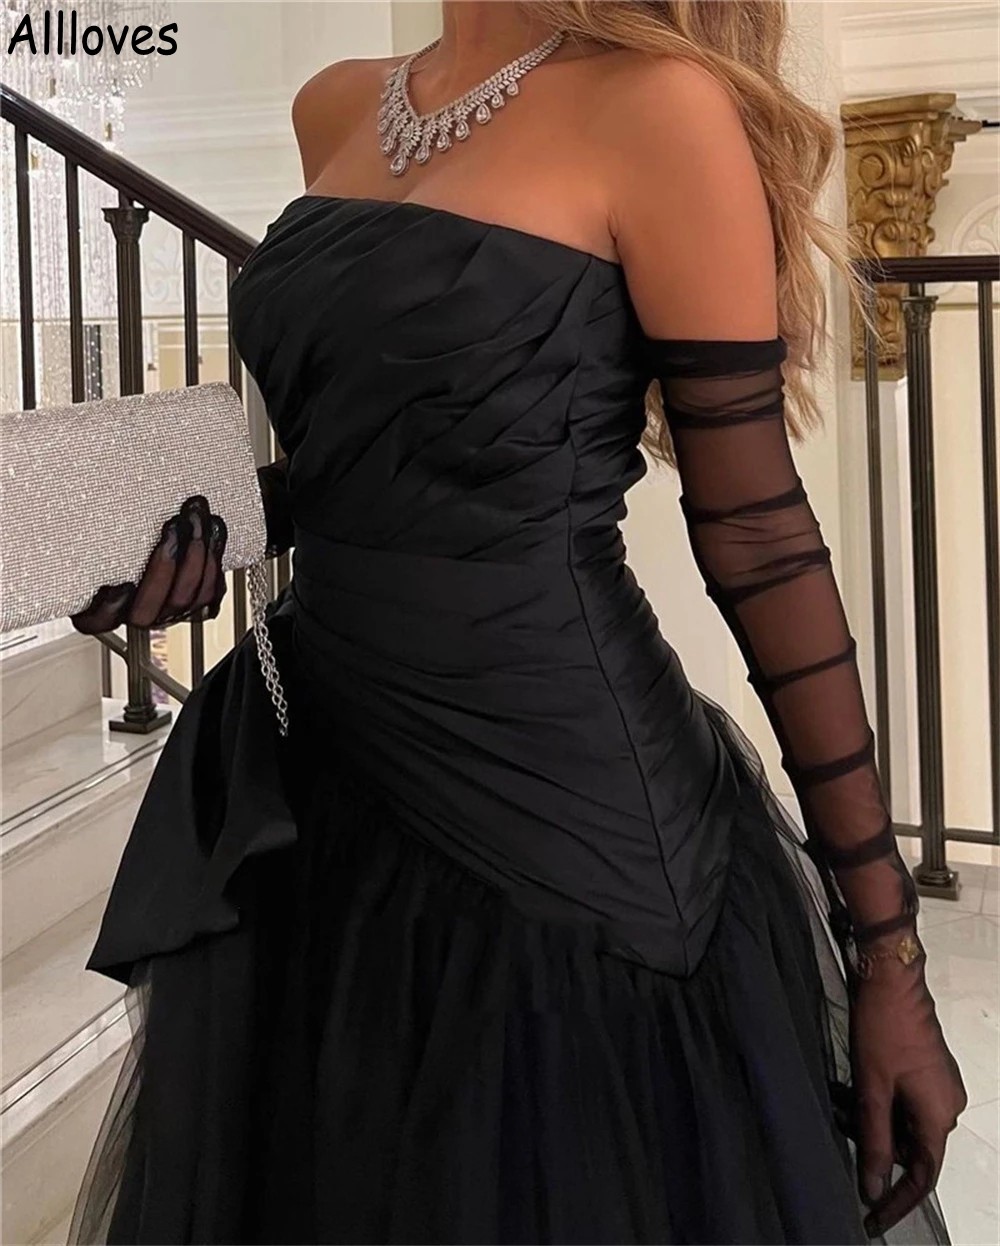 Vintage Black Strapless Tulle Evening Dresses Elegant Satin Ruched Sexy Puffy Empire Waist Princess Ball Gowns Plus Size Women Dance Prom Formal Party Dress CL1641